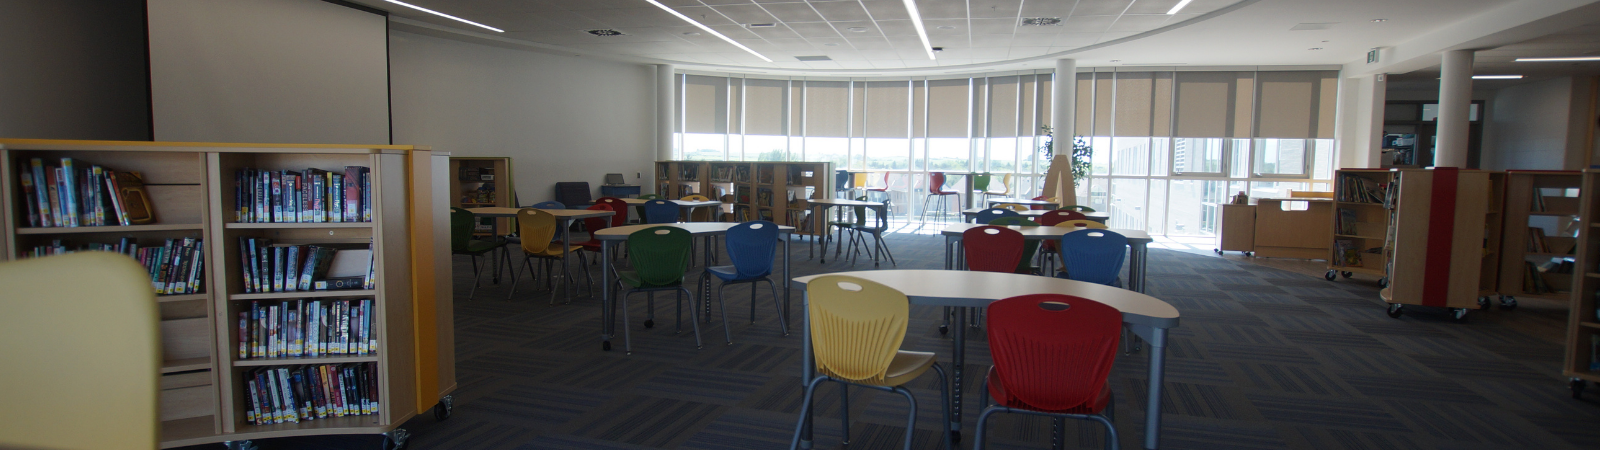 Interior of St. Anne Catholic School Learning Commons